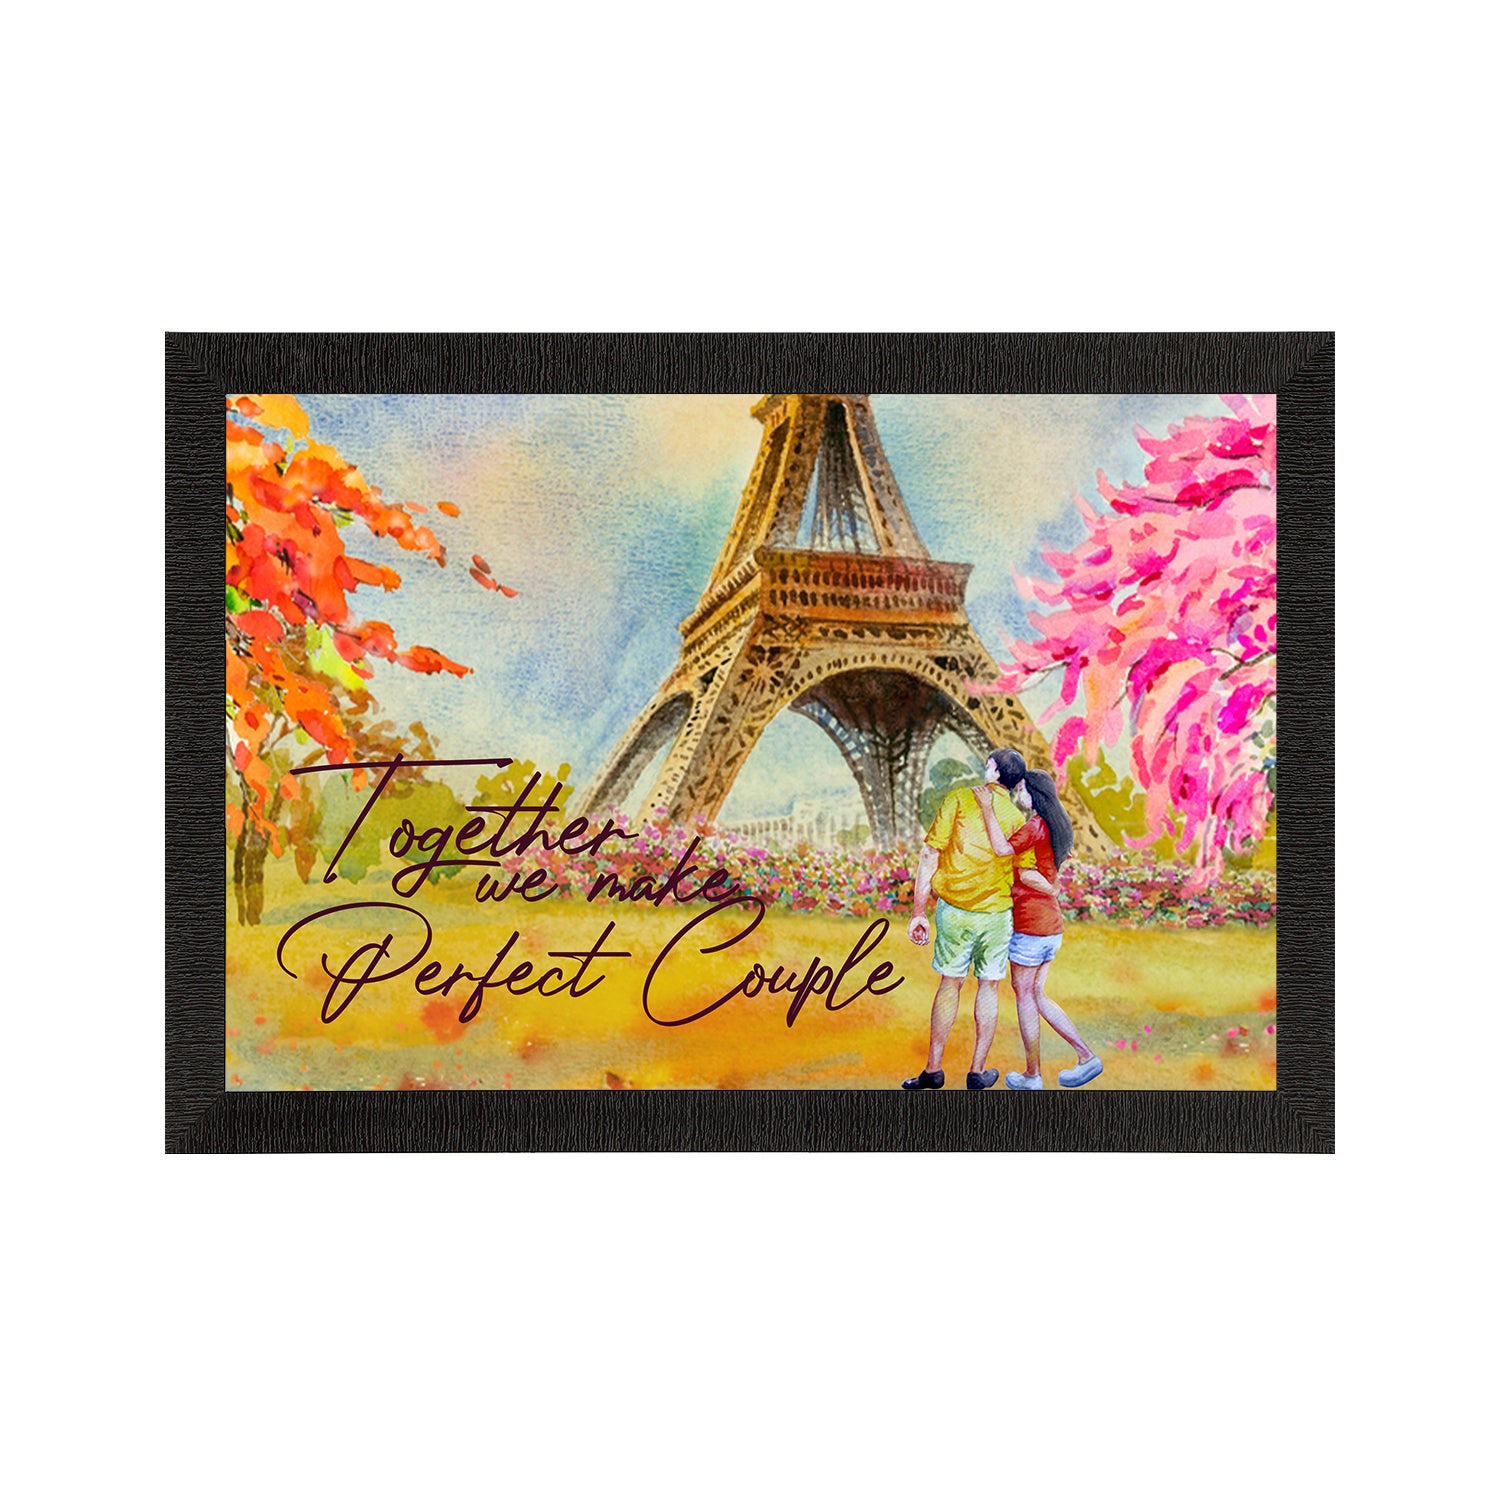 "Together we make Perfect Couple"  Romantic Couple in front of Eiffel Tower Love Theme Satin Matt Texture UV Art Painting